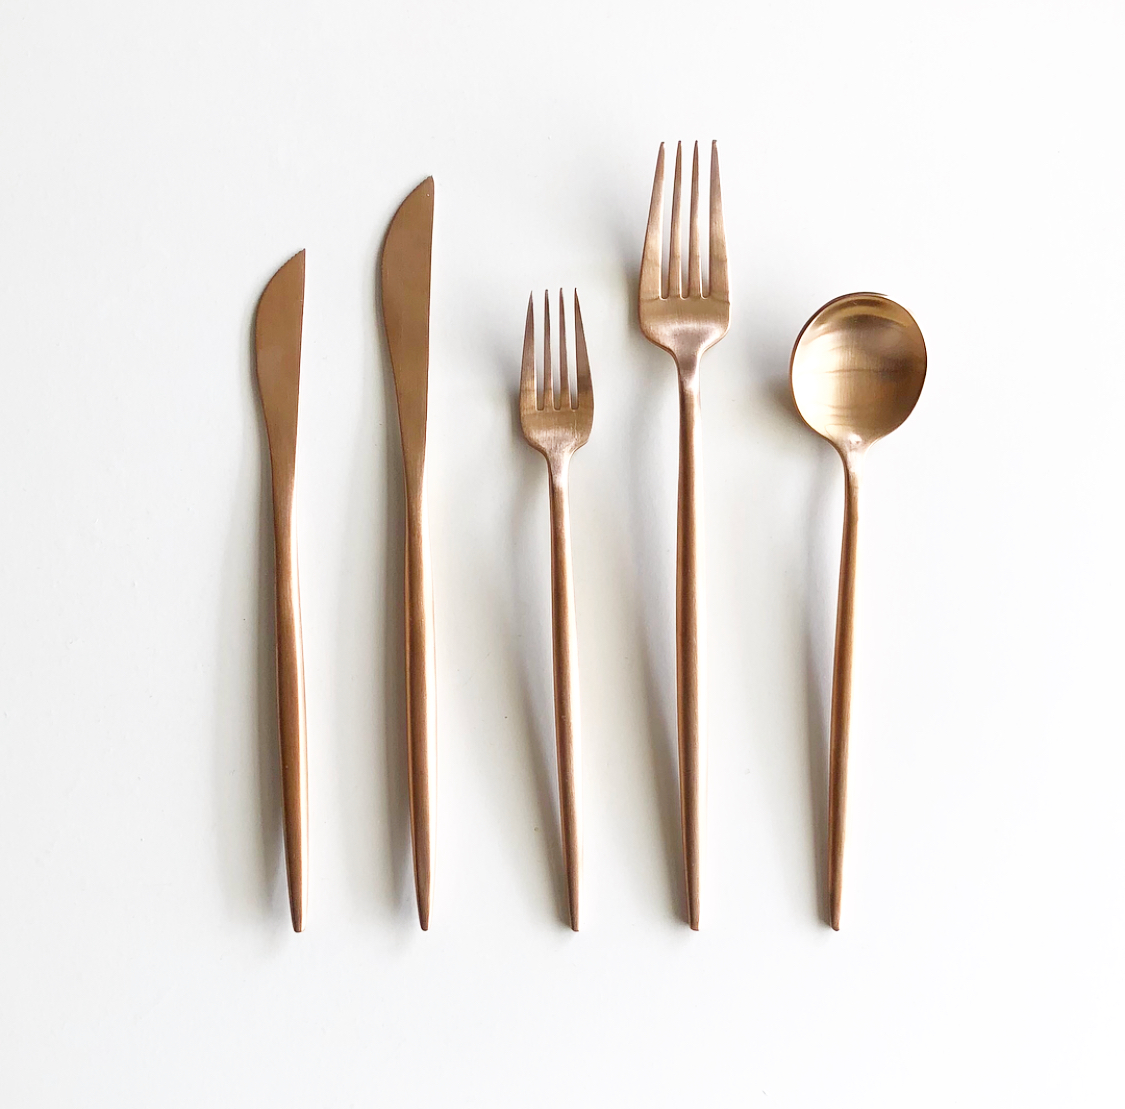 Brushed Copper Cutlery Hire – Contemporary Style